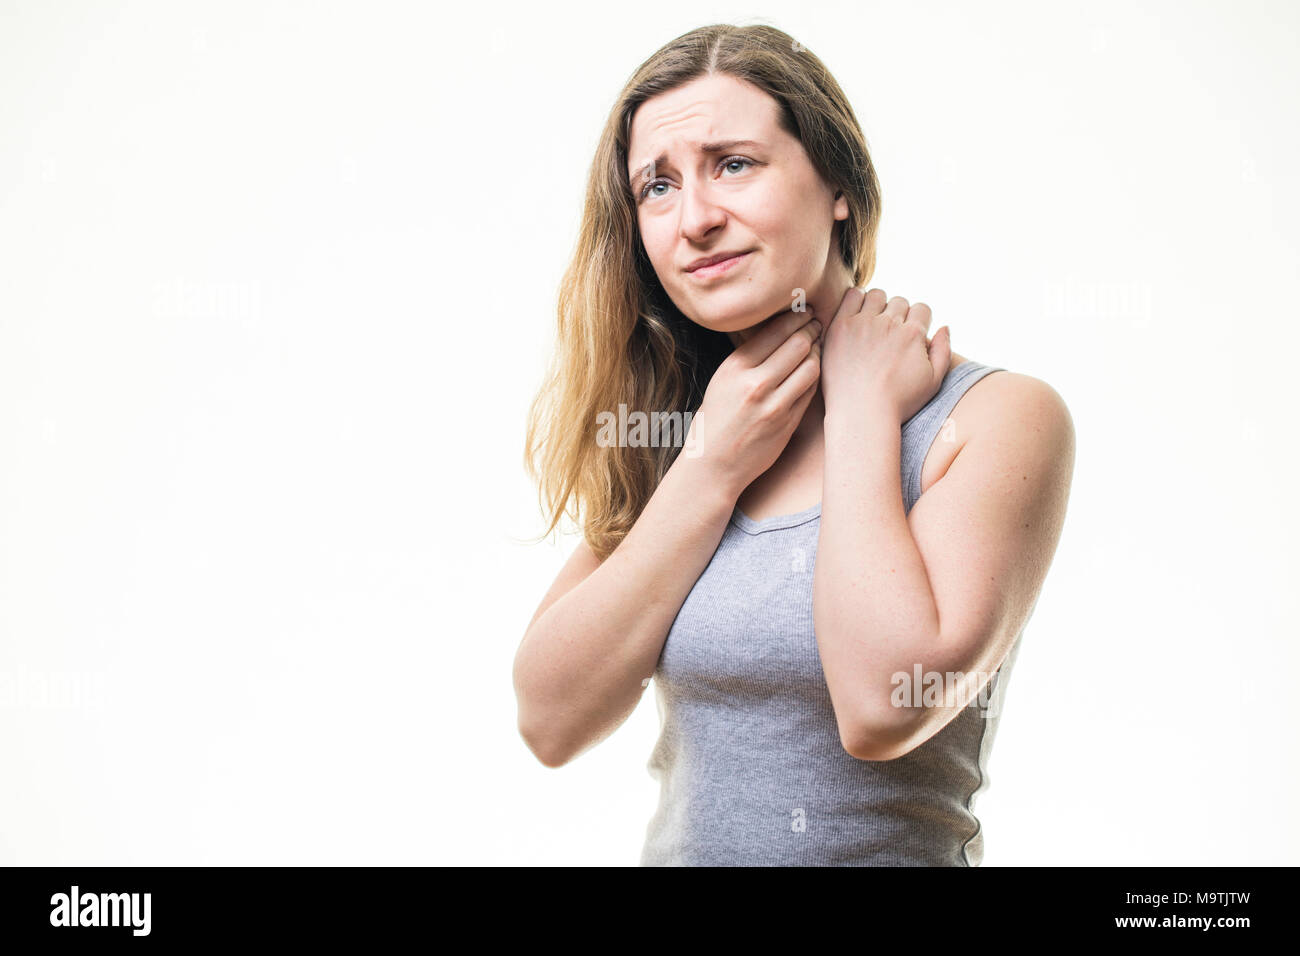 A young Caucasian woman girl wearing a grey vest,  suffering from a sore throat or neck pain, rubbing her skin for relief,  standing against a white background, UK Stock Photo